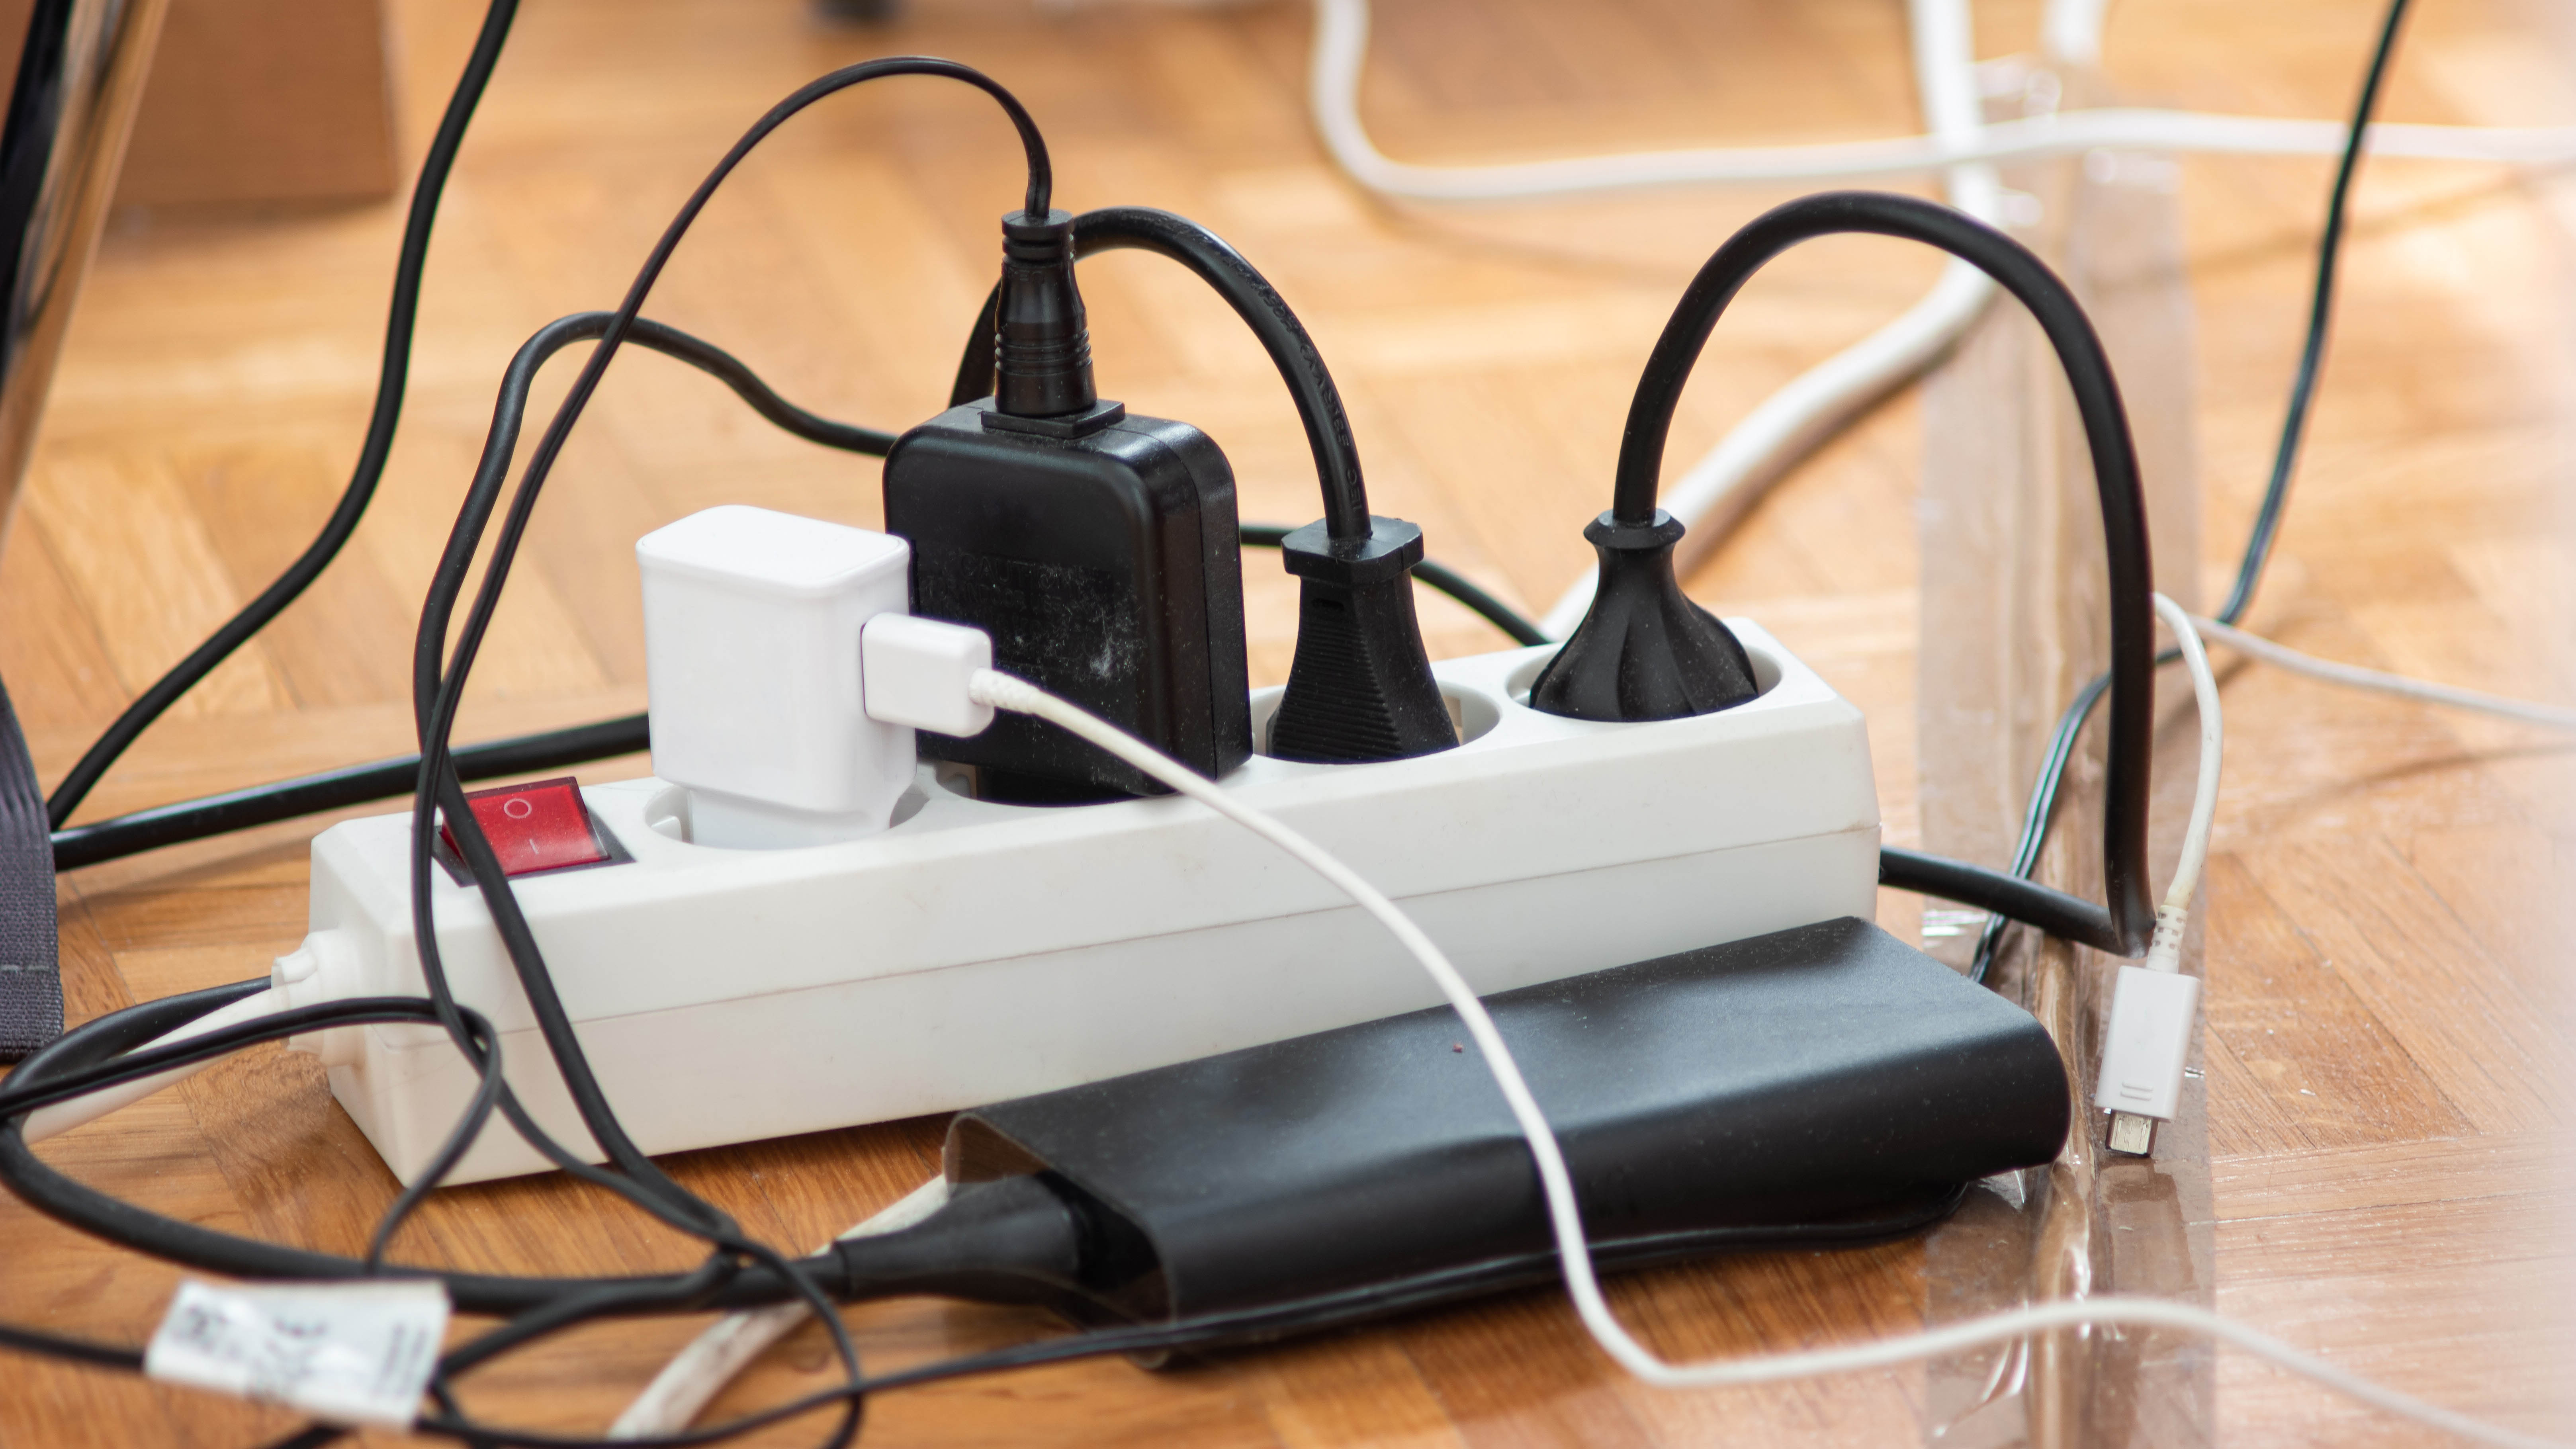 Surge Protector vs. Power Strip: What's the Difference? - Bob Vila